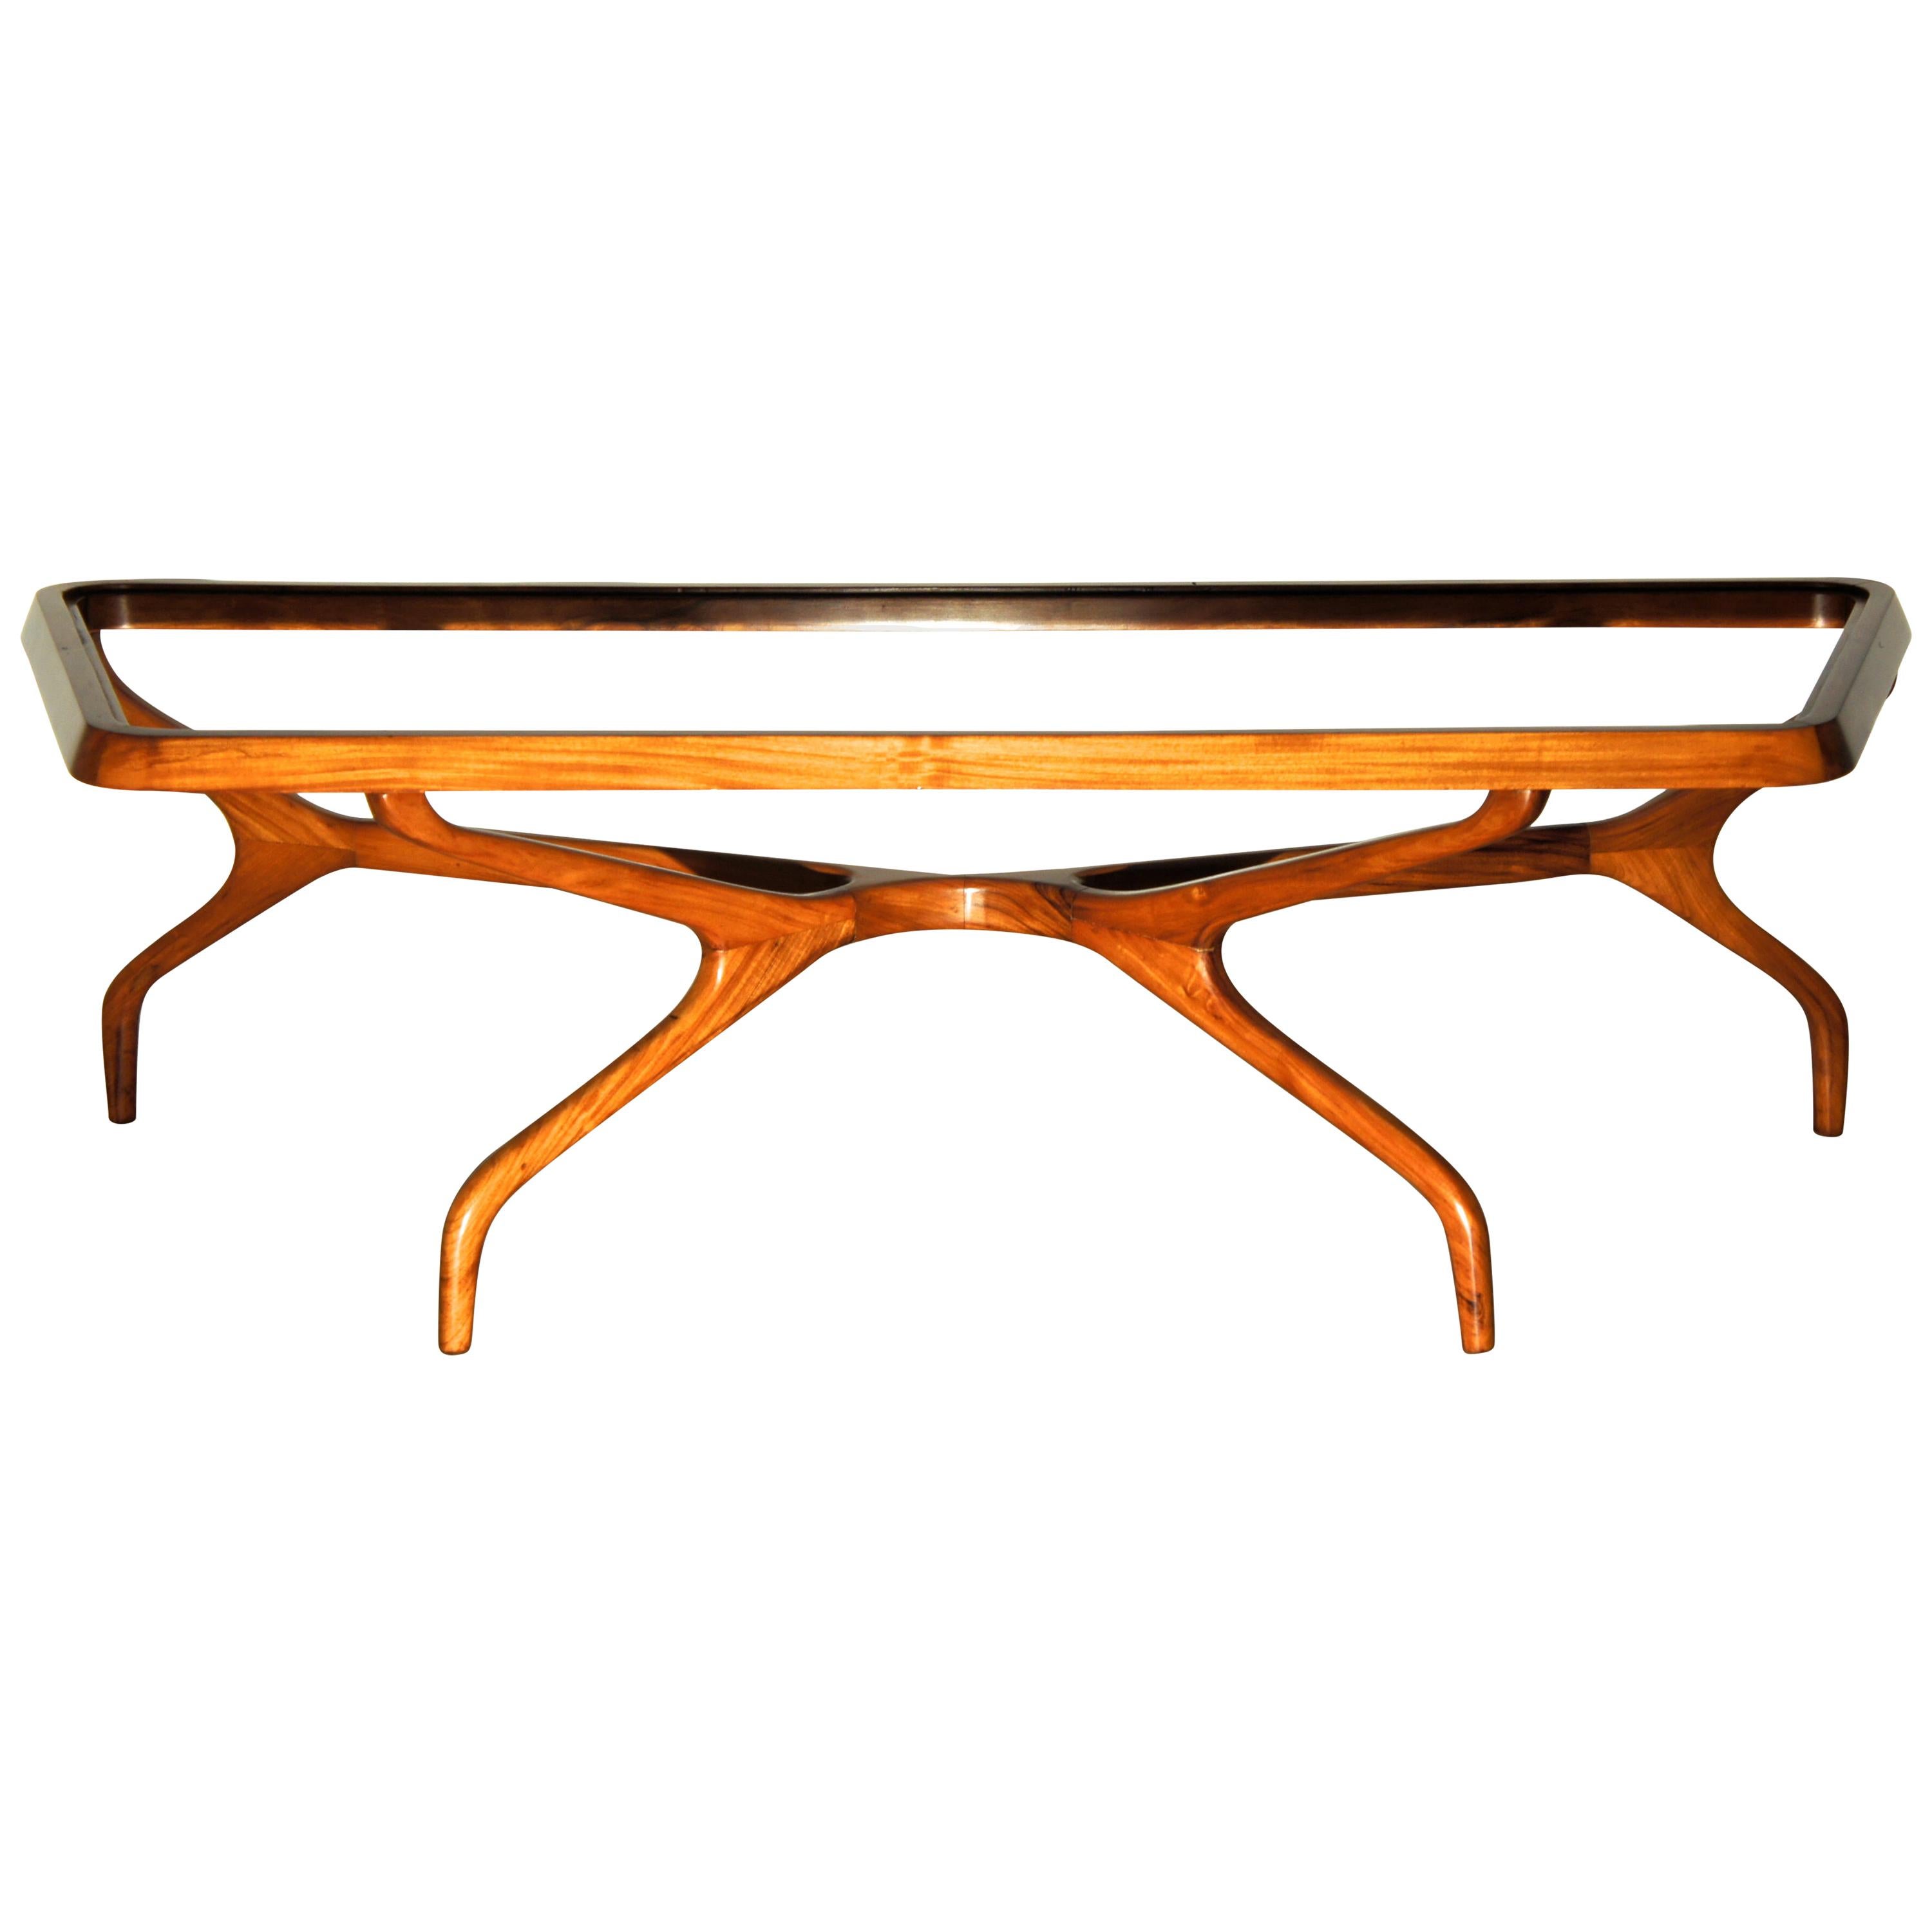 Giuseppe Scapinelli. Mid-Century Modern "Spider" Coffee Table in Wood